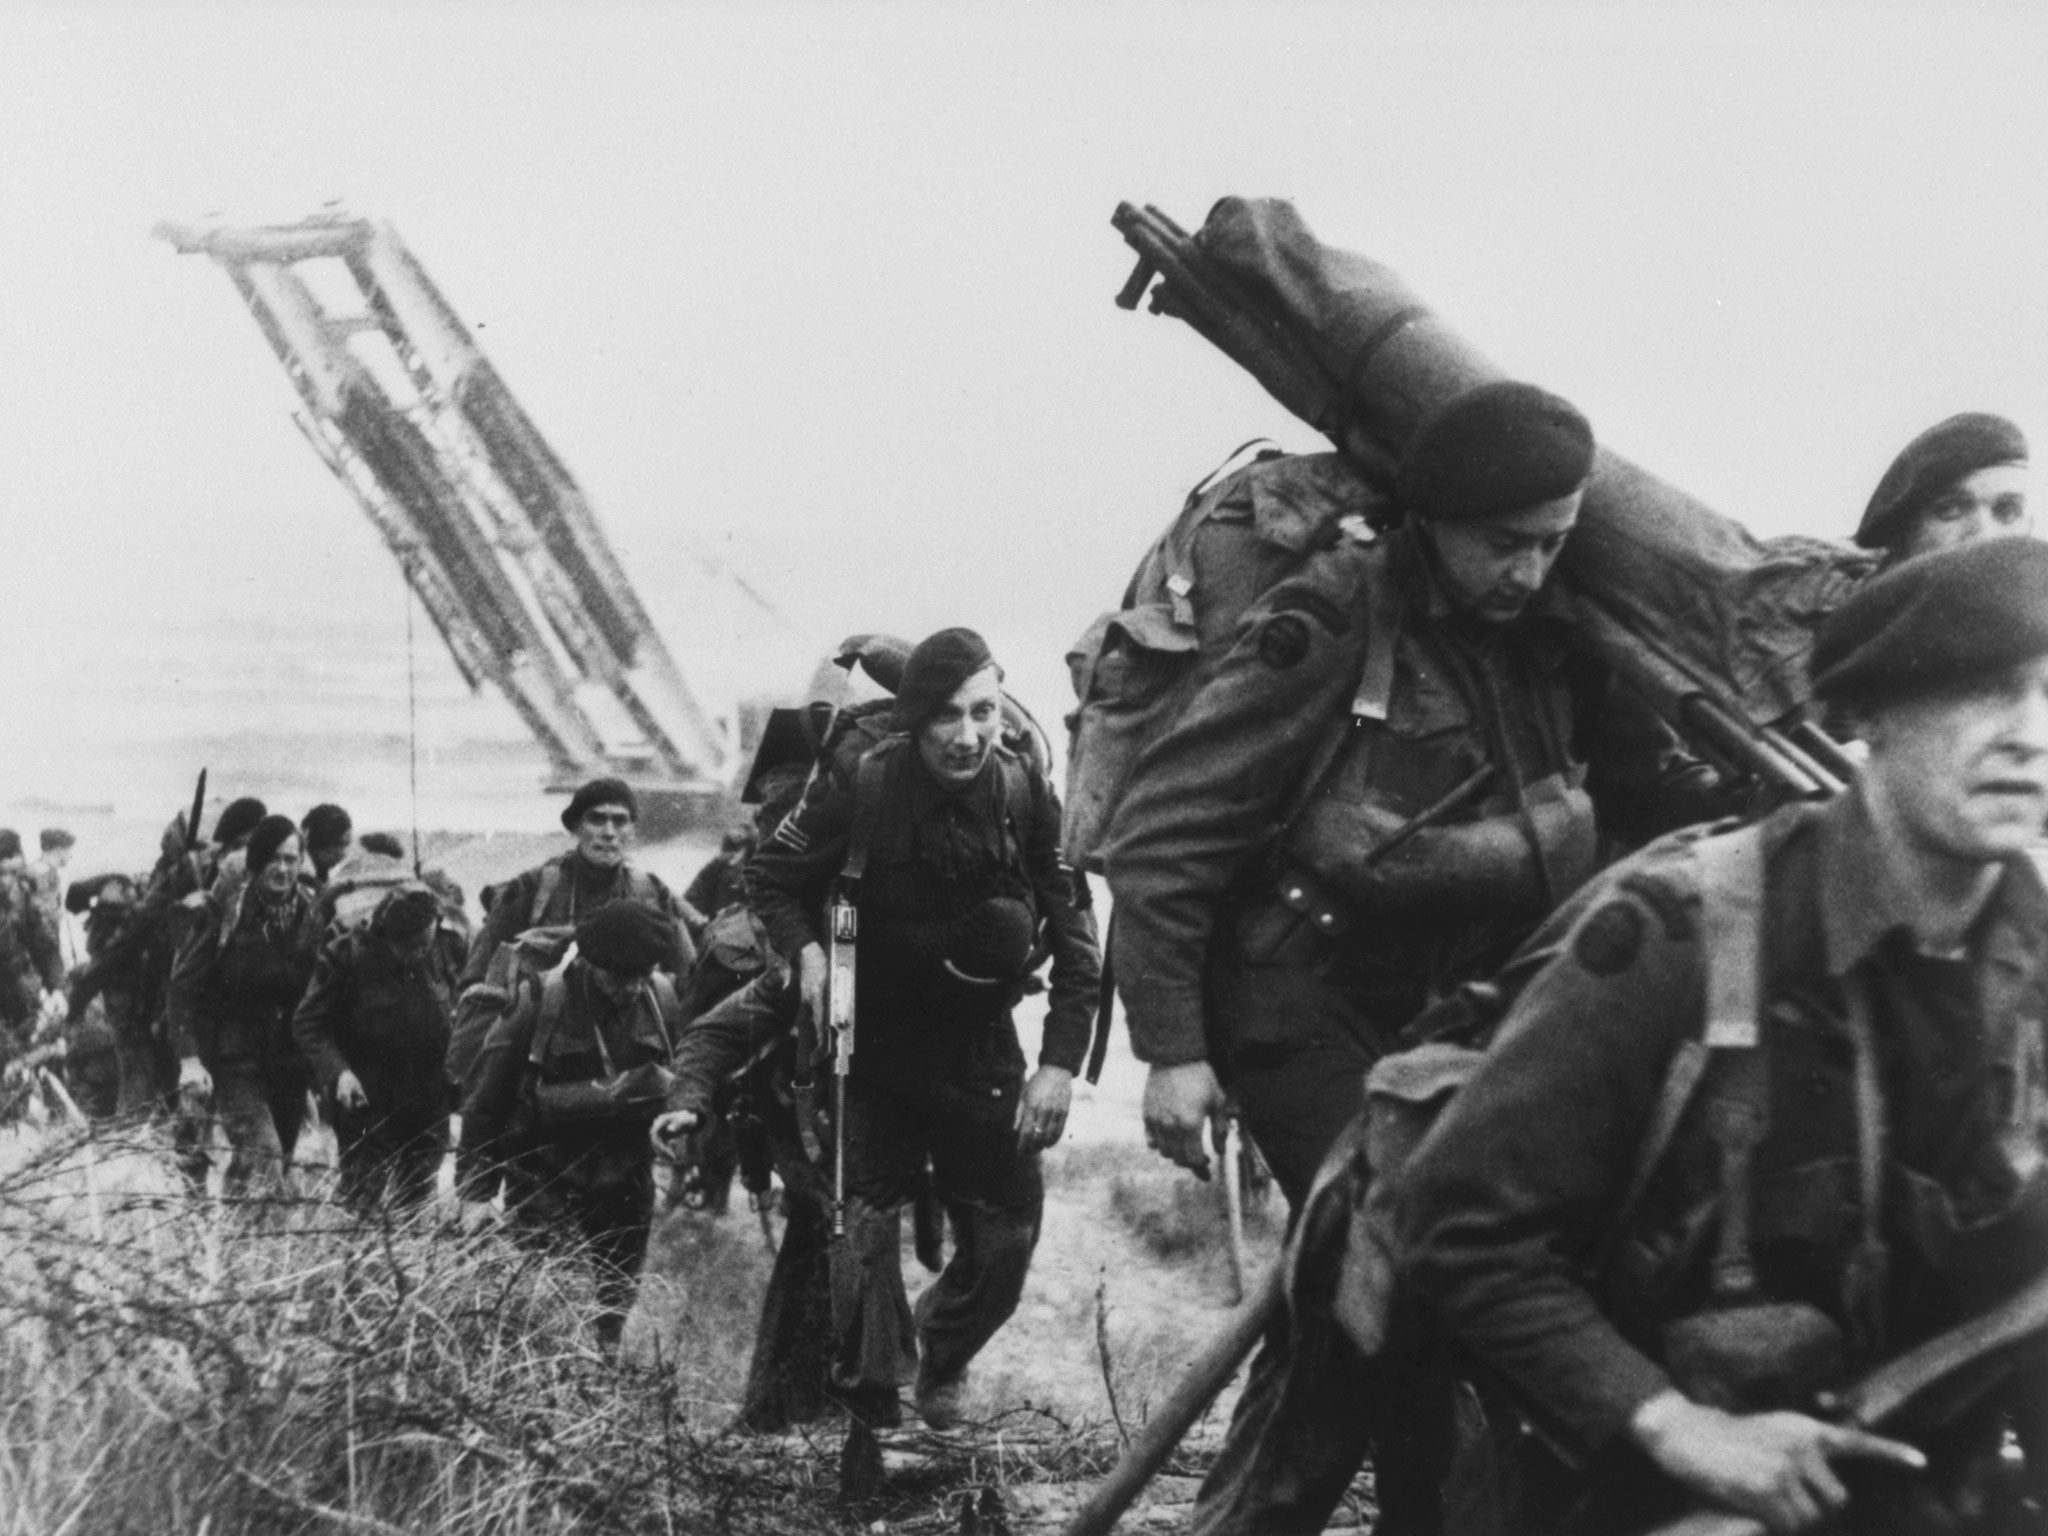 Royal Marine Commandos moving off the Normandy Beaches during the advance inland from "Sword" beach on 6 June 1944